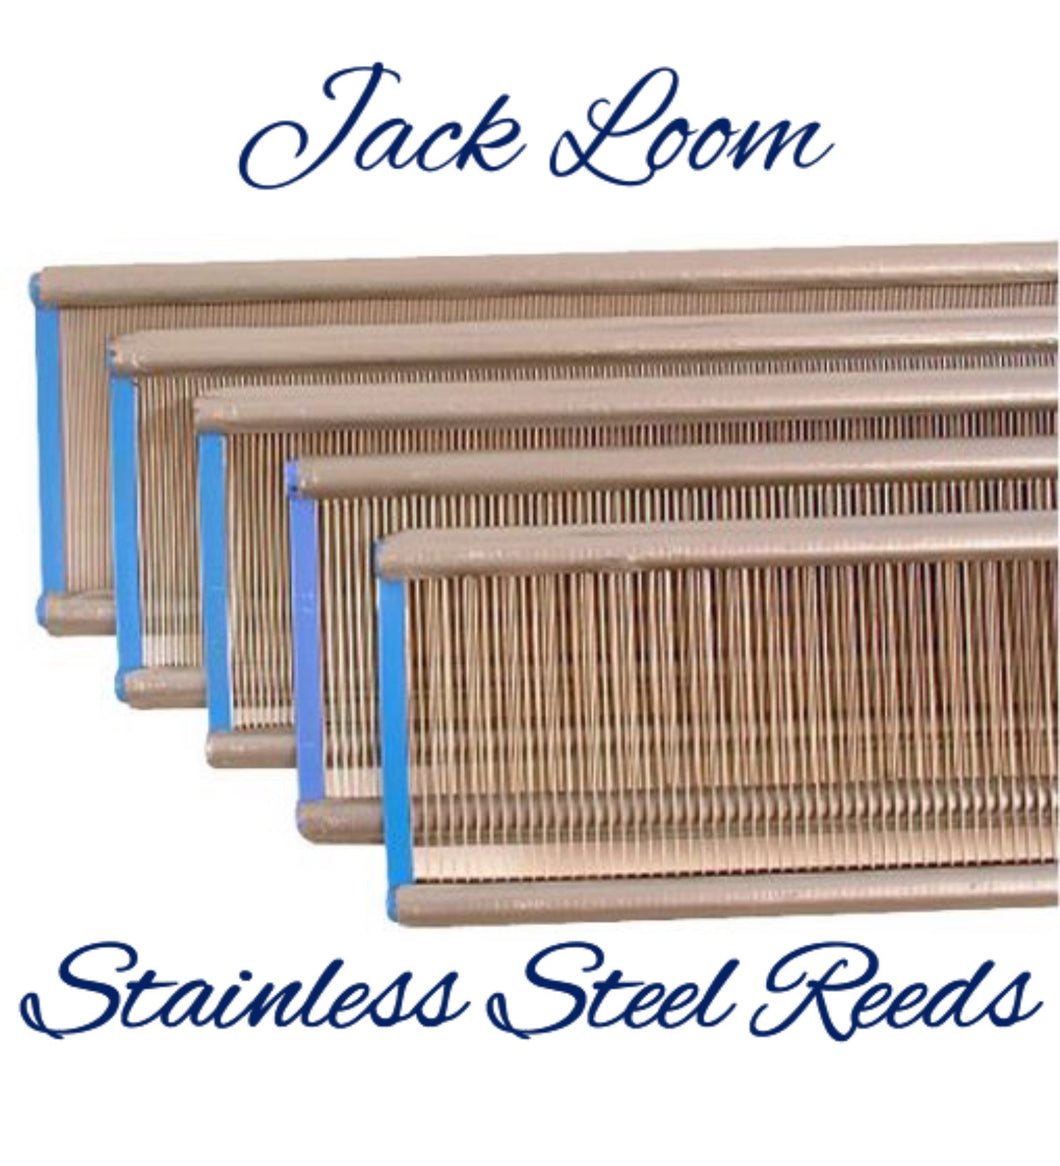 Ashford Jack Loom Stainless Steel Reeds  SUPER FAST INSURED Shipping!